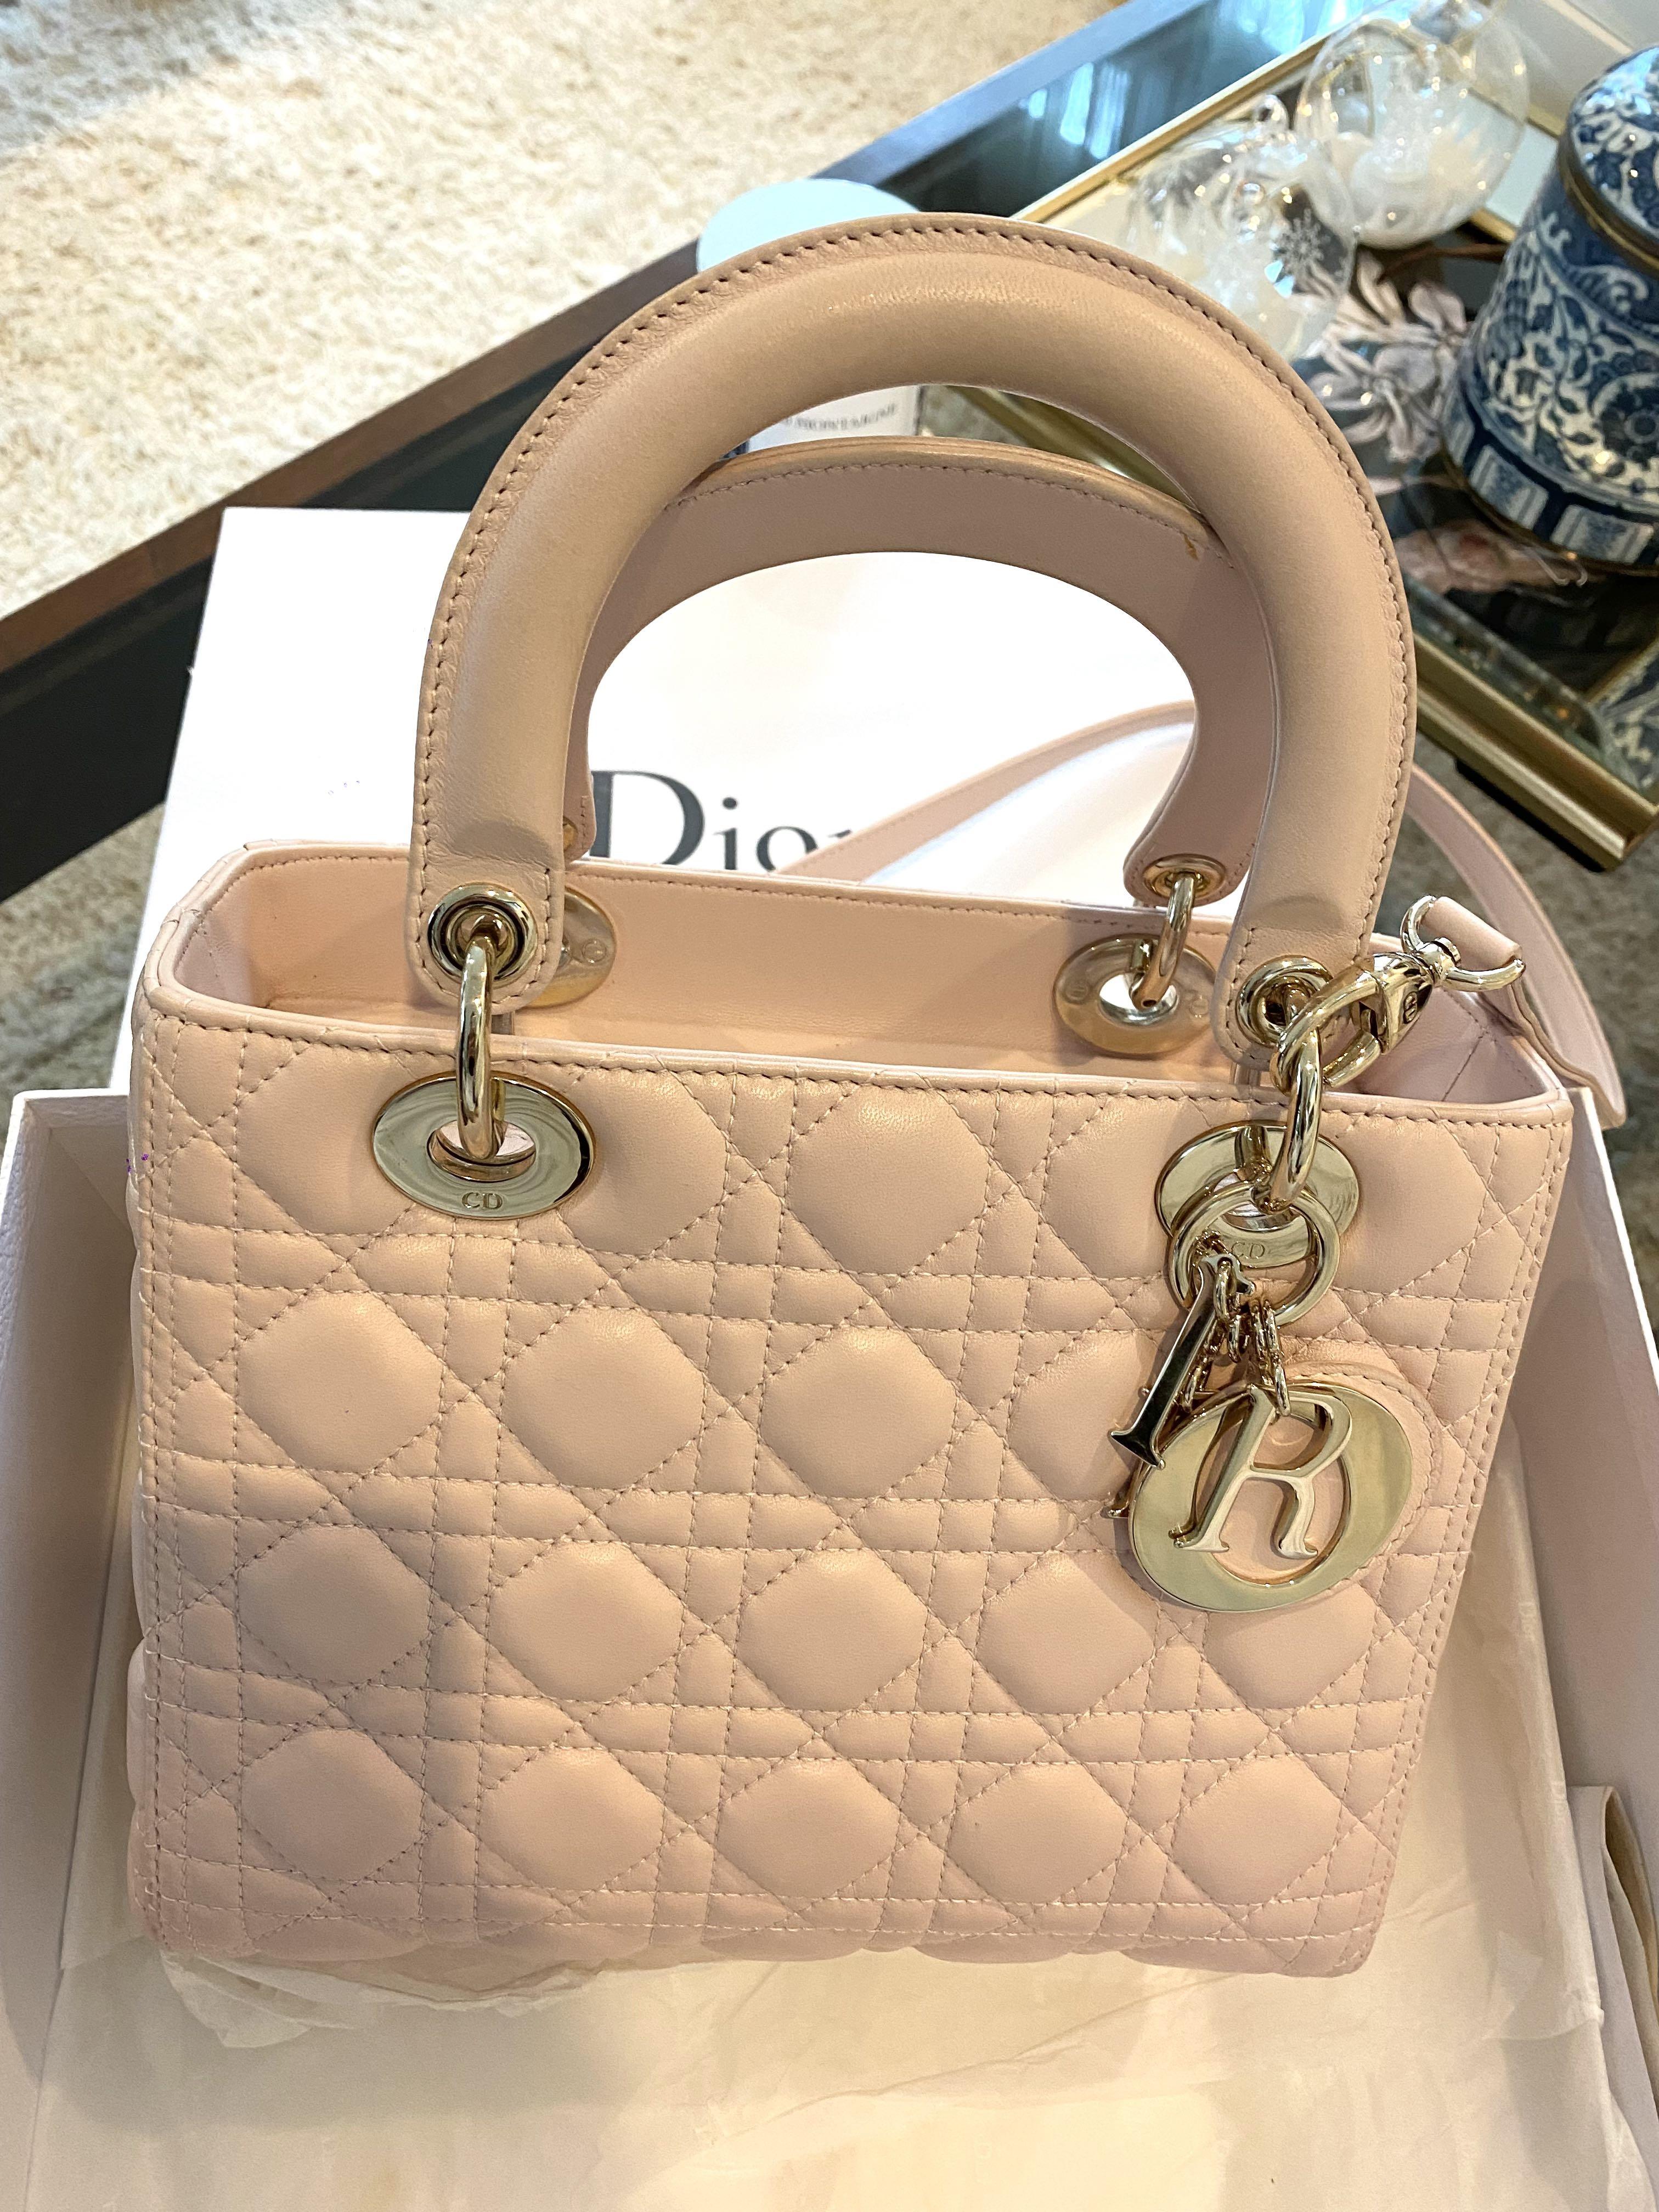 Authentic Second Hand Christian Dior Medium Lady Dior Bag PSSD5800013   THE FIFTH COLLECTION